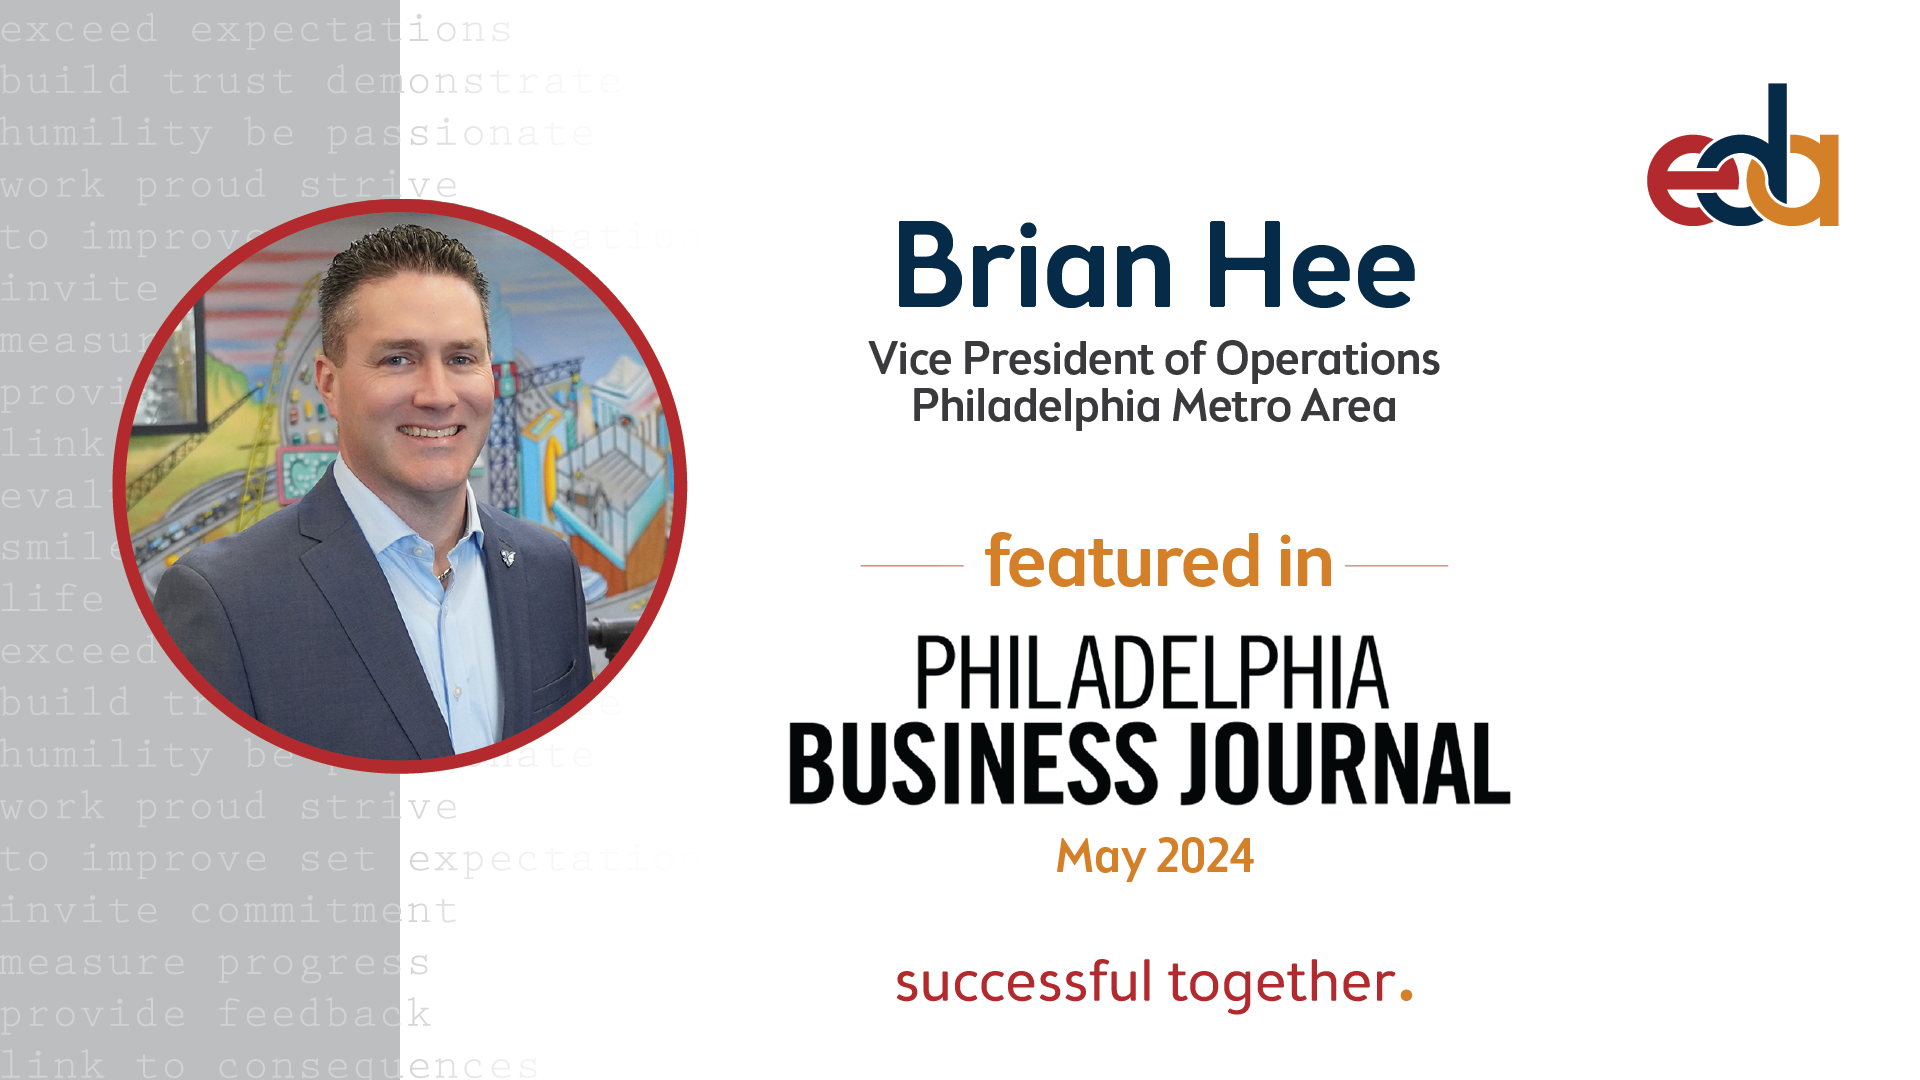 Brian Hee May 2024 Business Journal